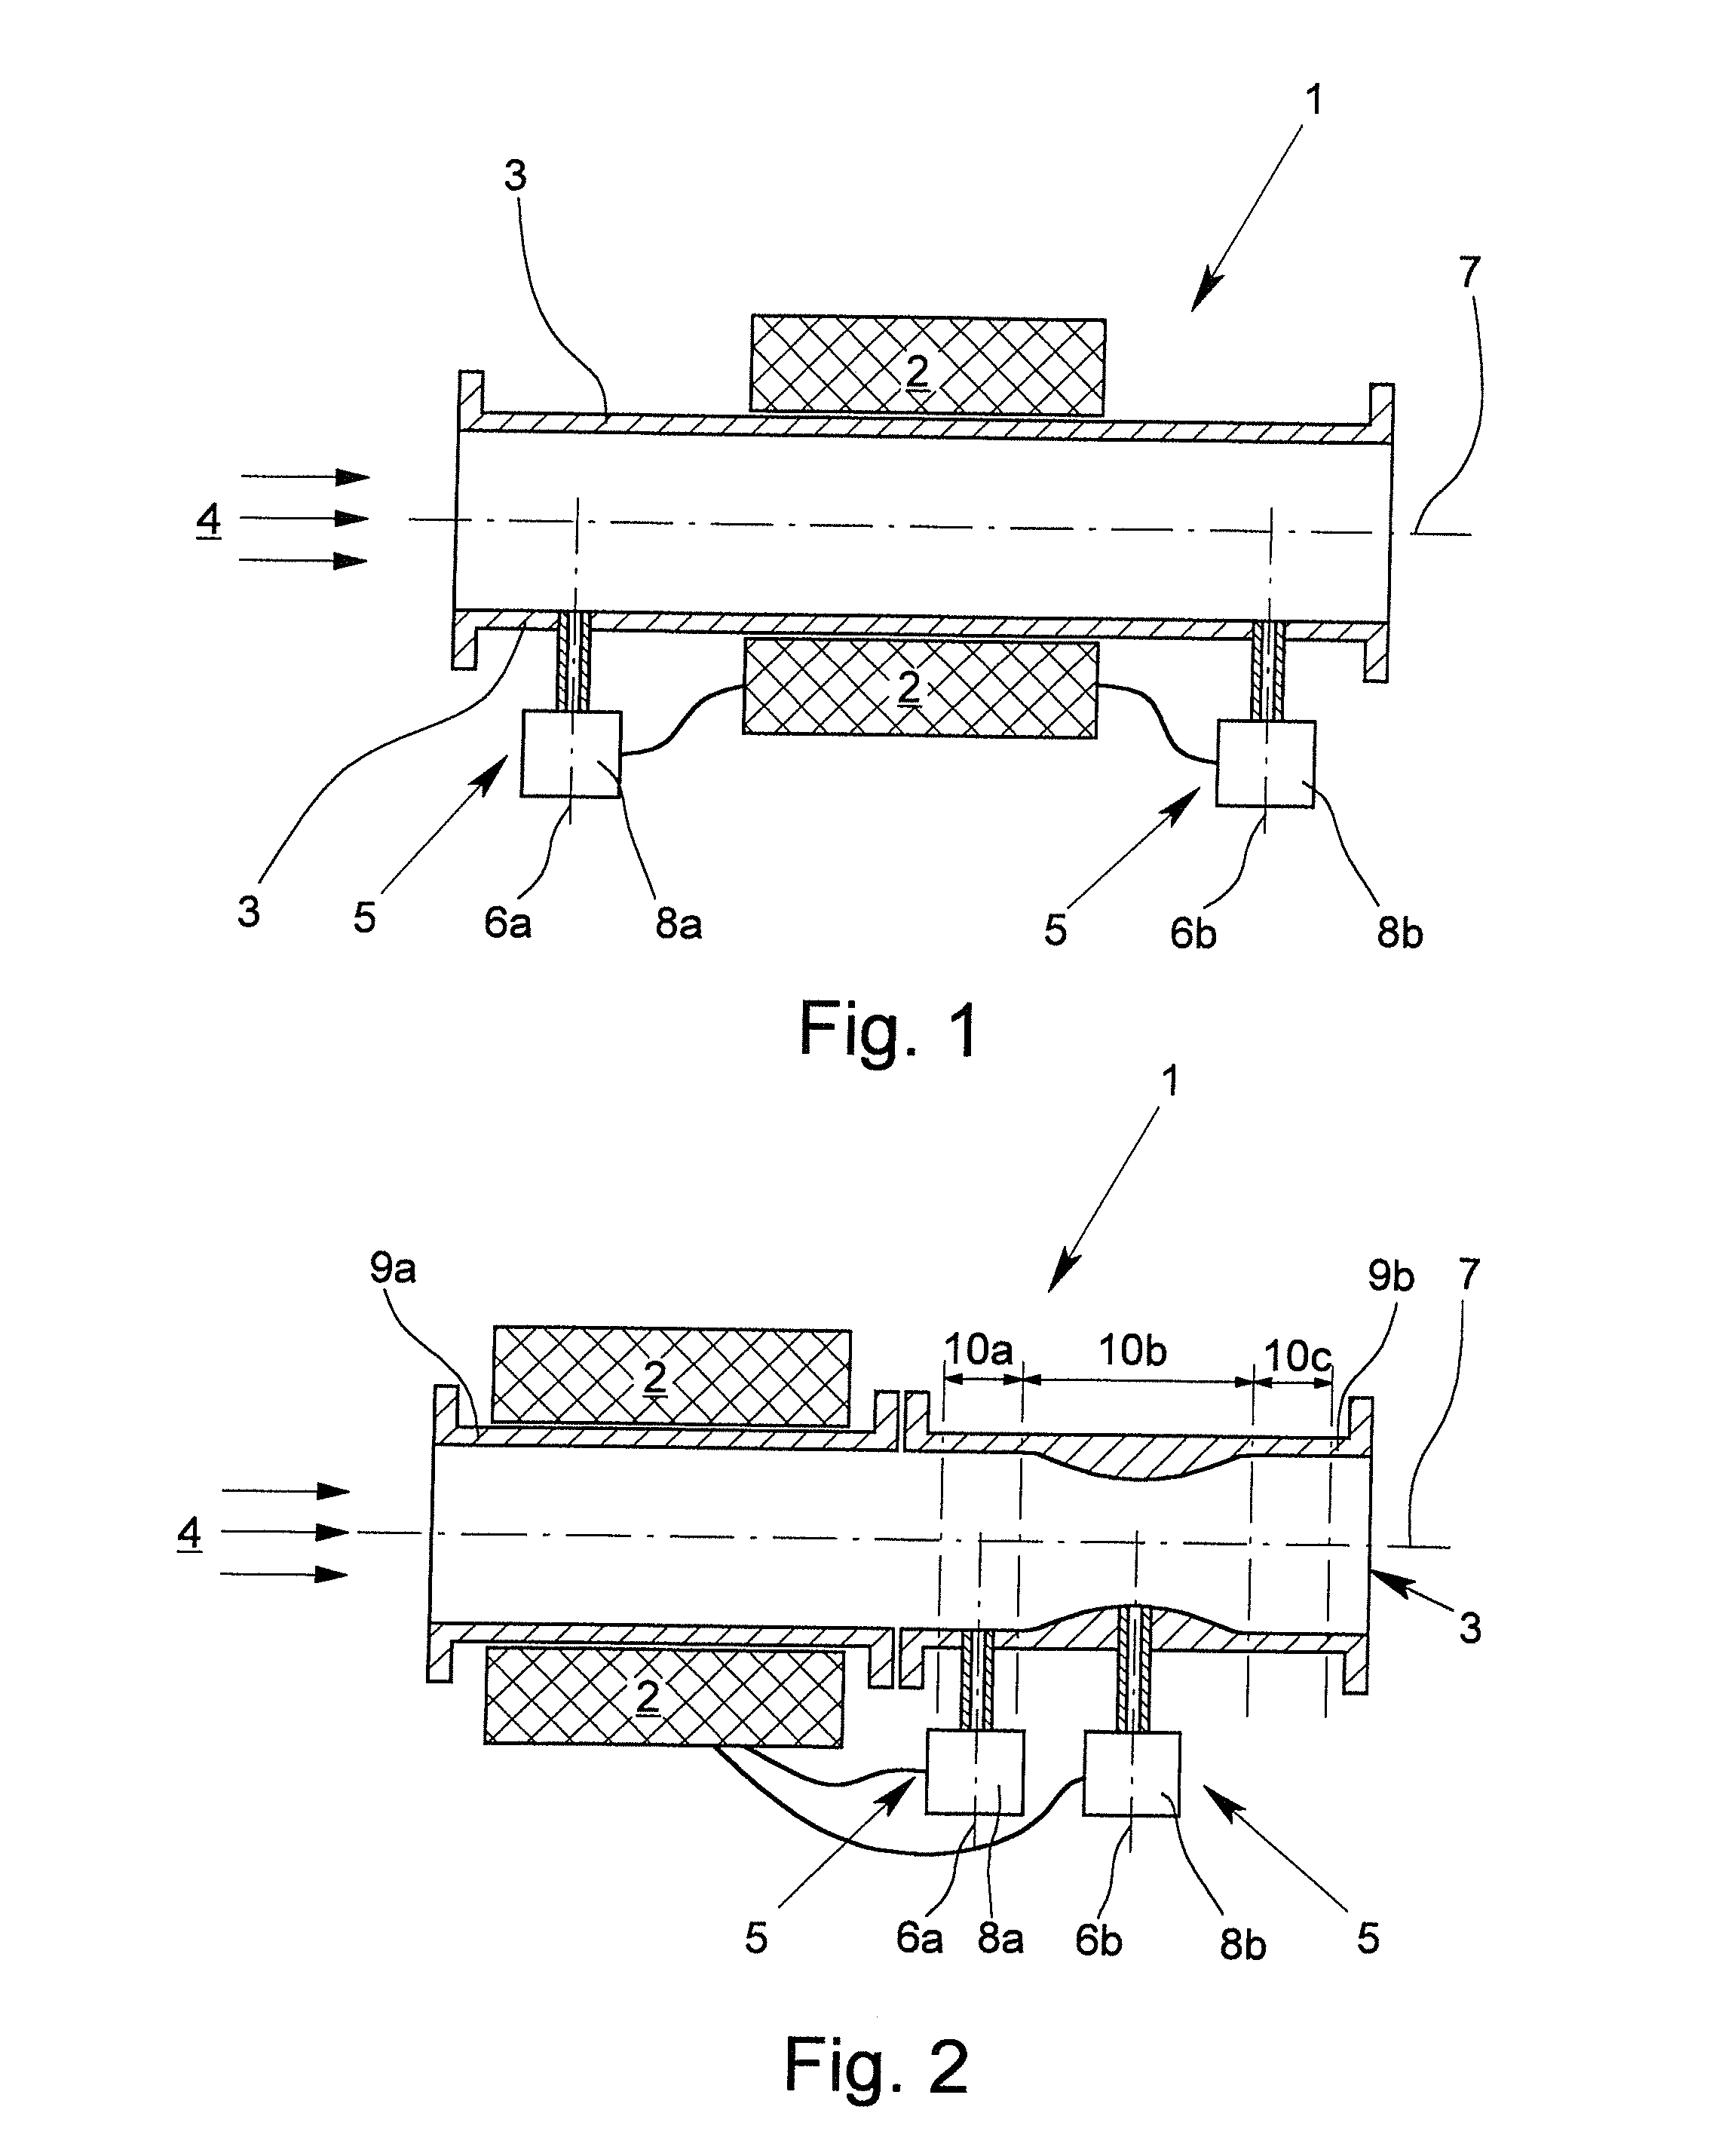 Nuclear magnetic flow meter and method for operation of nuclear magnetic flow meters